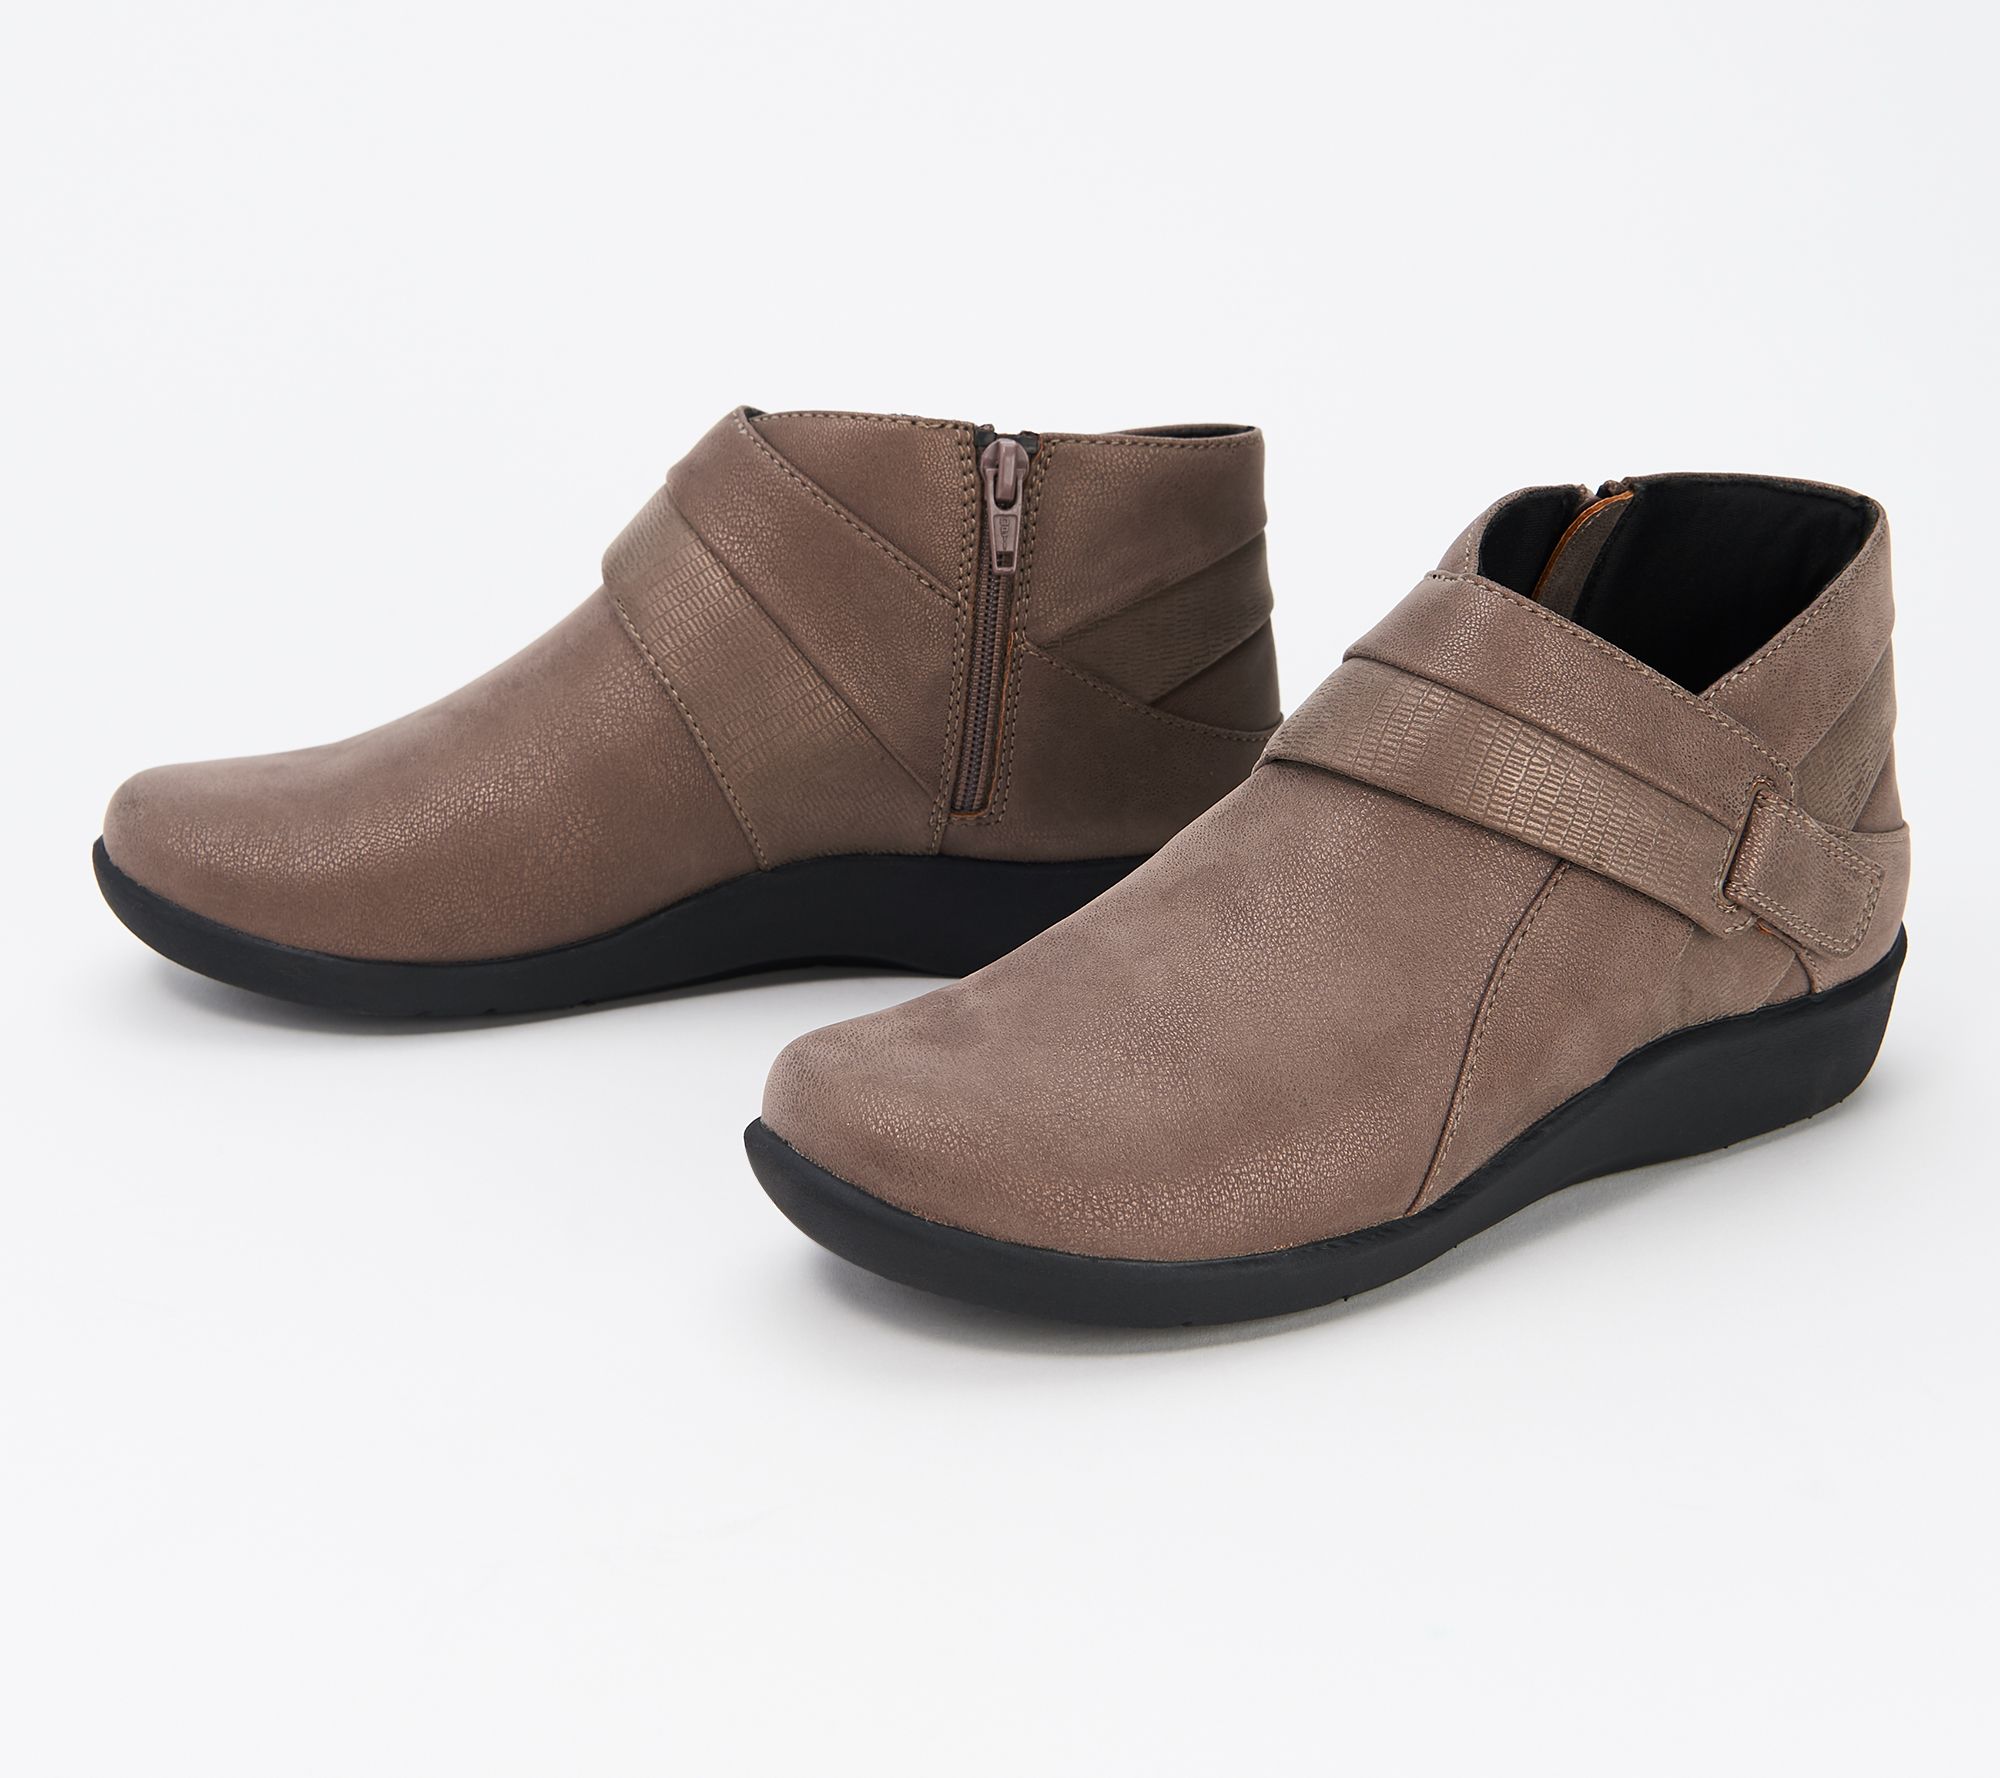 Clarks Cloudsteppers Exposed Ankle Booties - Sillian Rani - QVC.com